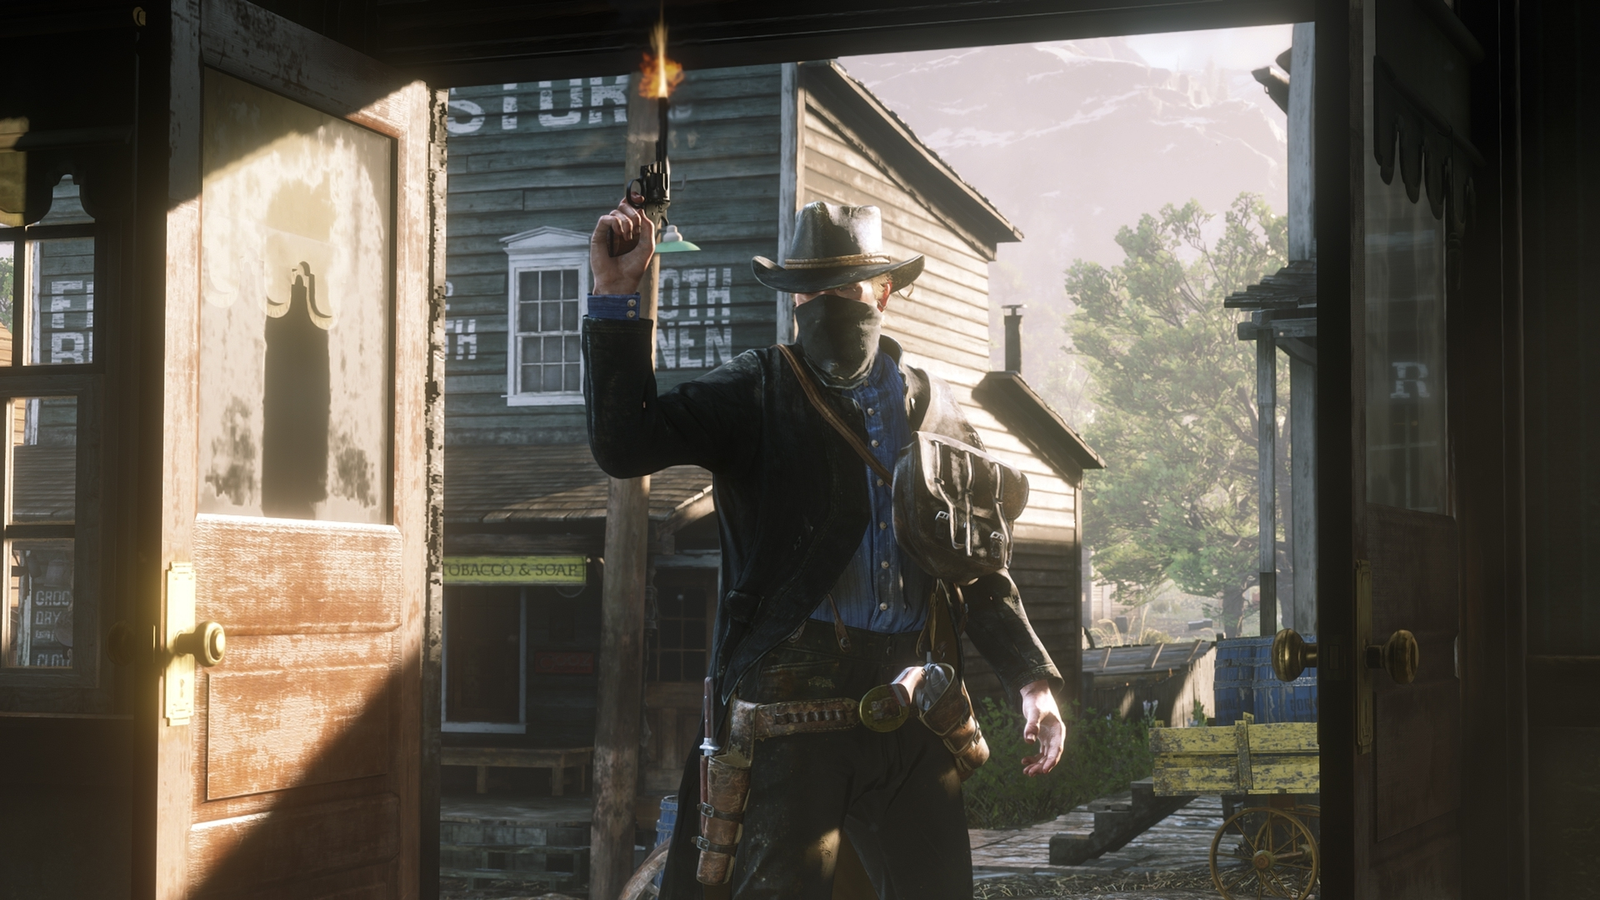 Red Dead Redemption 2 on PC would be great if I could actually play it -  The Verge